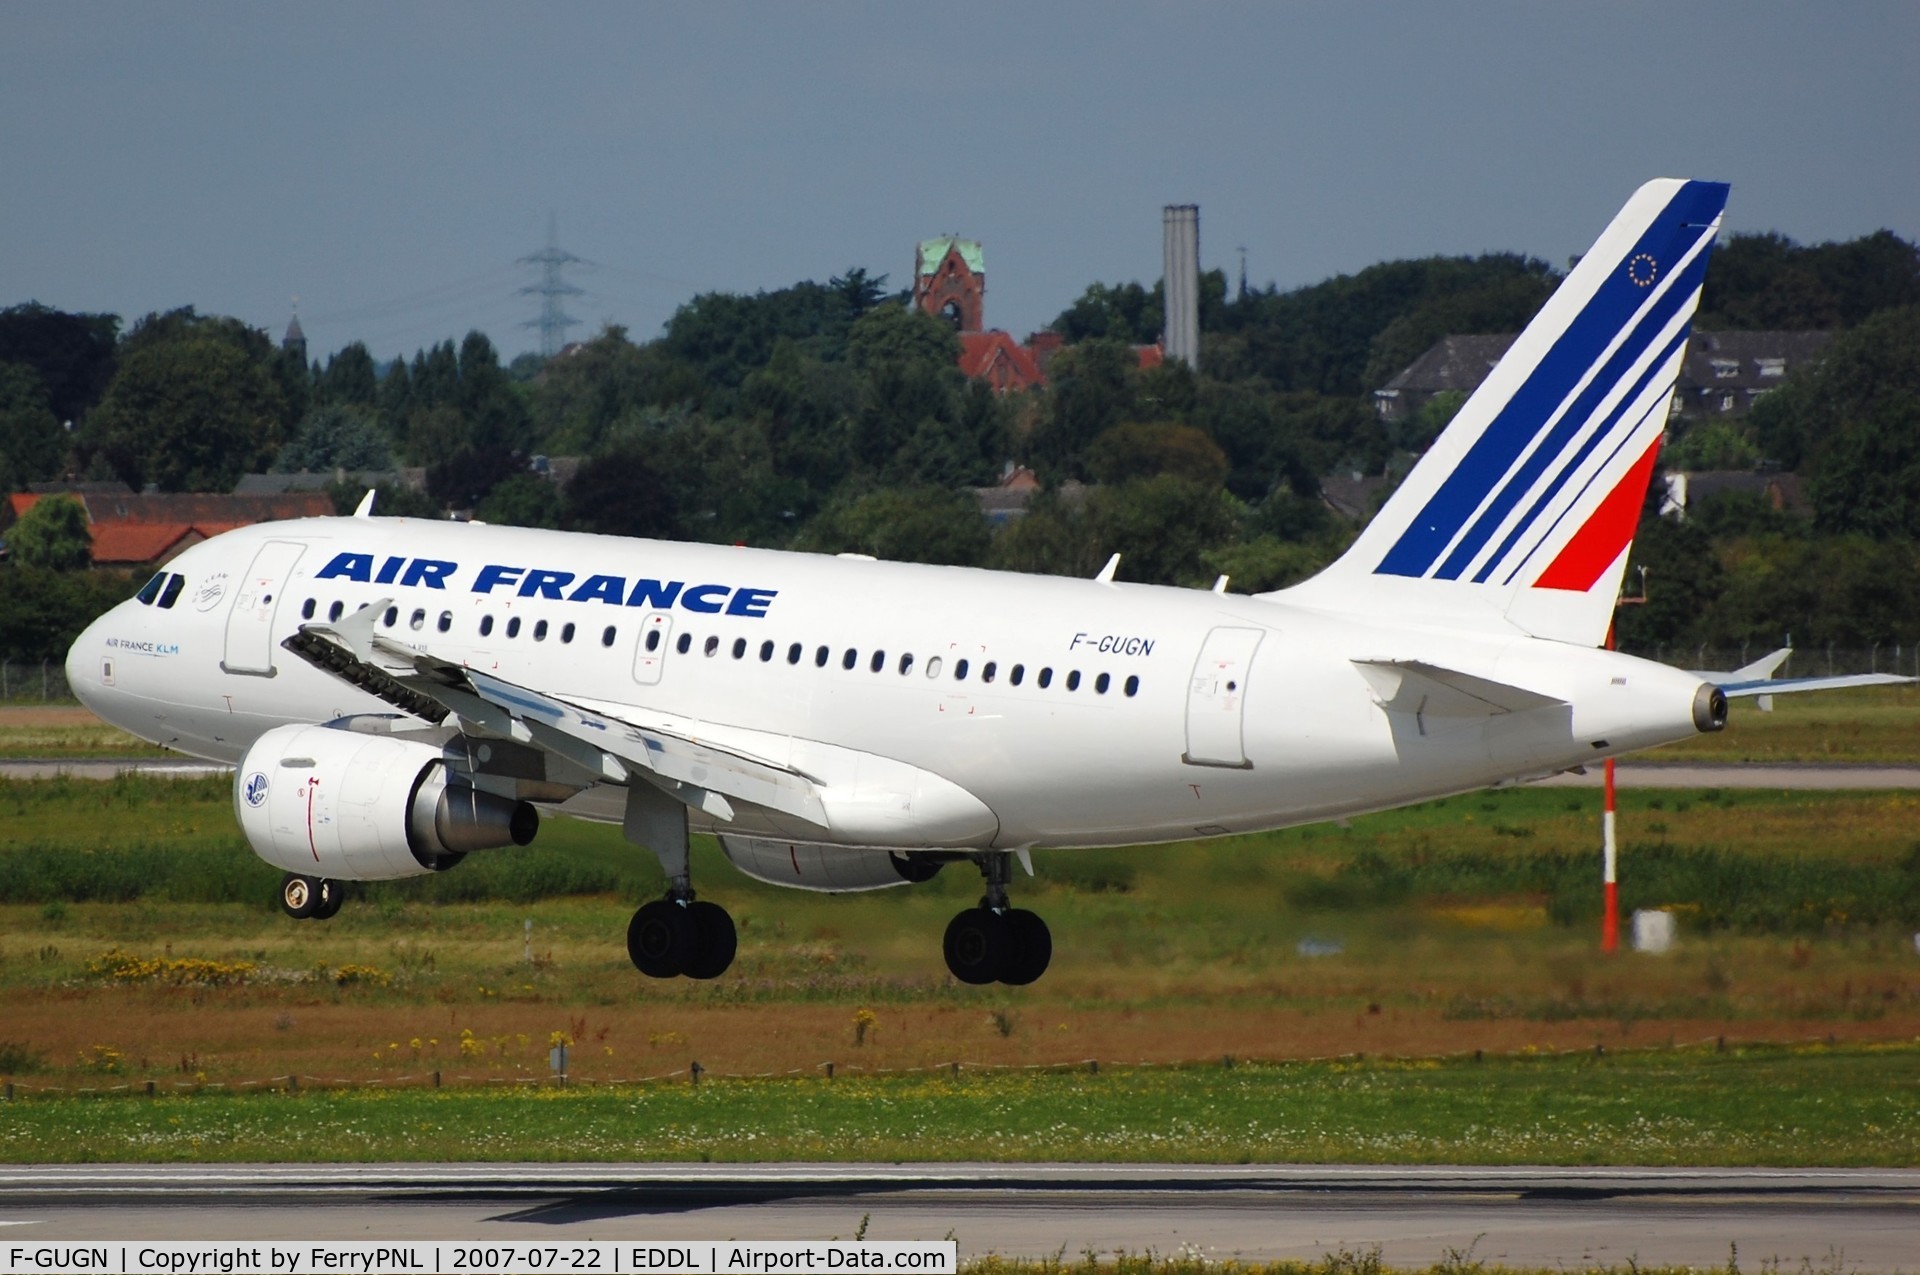 F-GUGN, 2006 Airbus A318-111 C/N 2918, Arrival of Air France A318